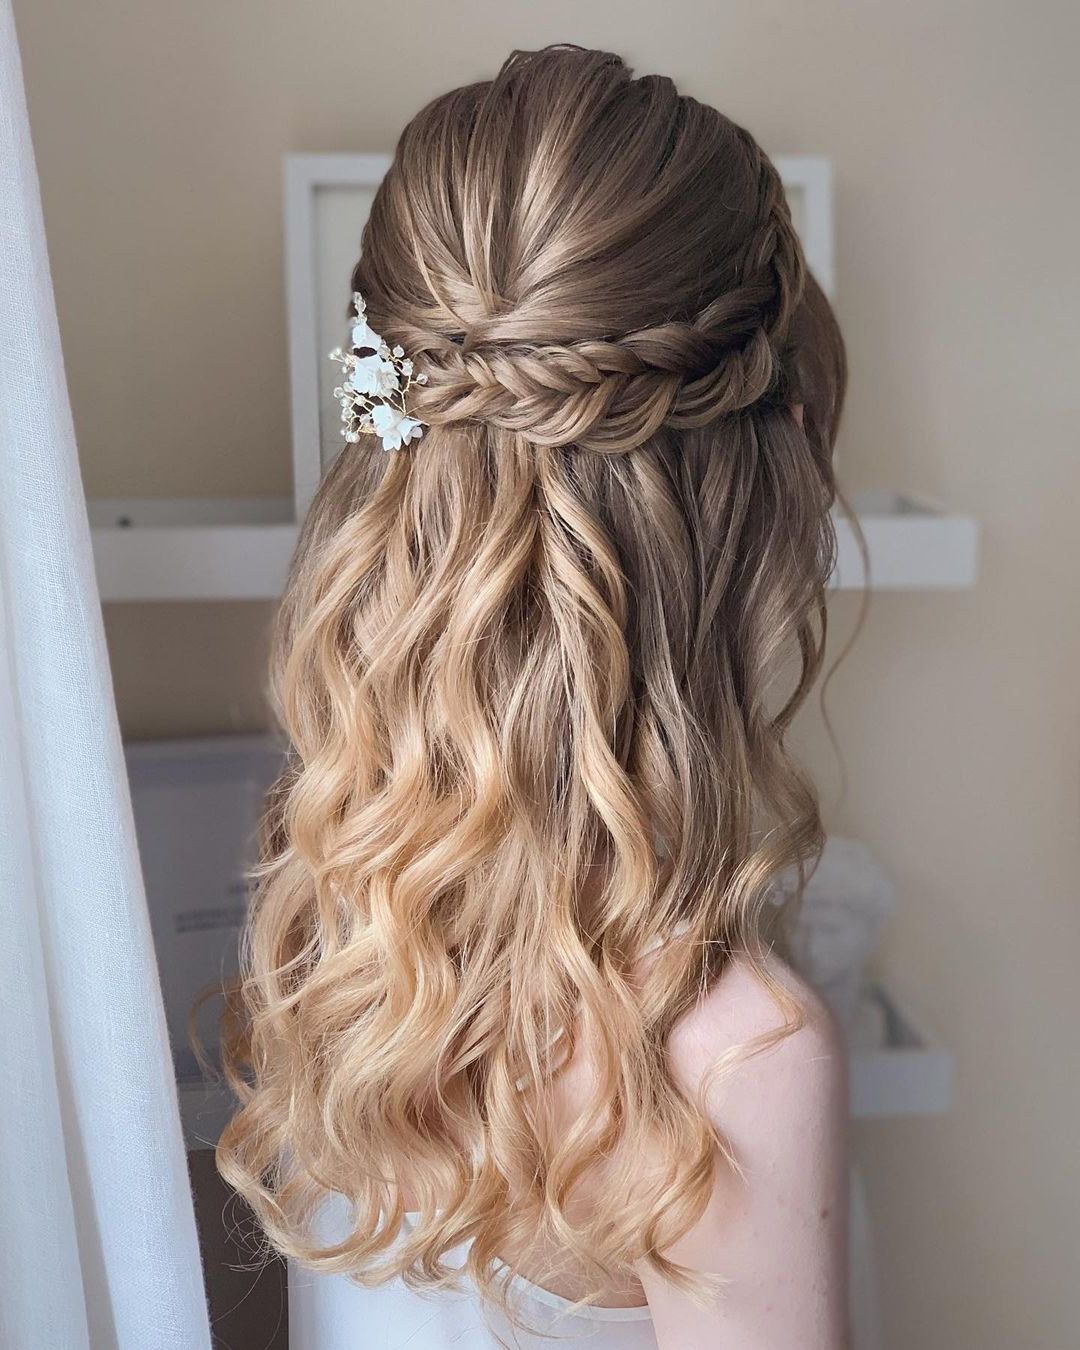 Half Up Half Down Wedding Hairstyles 2022/23 Guide: 70+ Looks Intended For Fashionable Braided Half Up Knot Hairstyles (View 18 of 20)